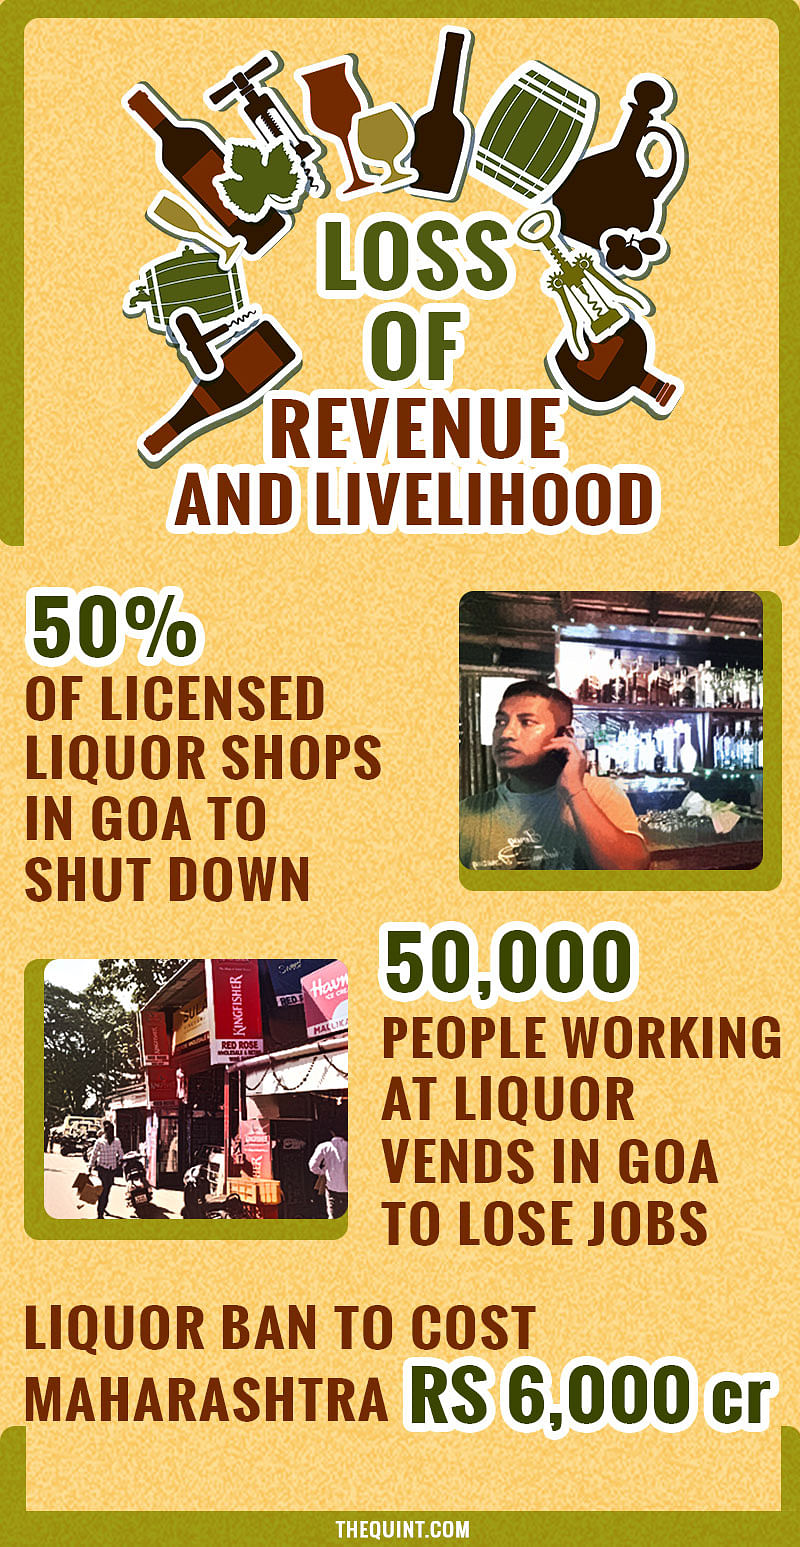 The Supreme Court’s order on  liquor sale on highways raises the issue of livelihoods being affected.